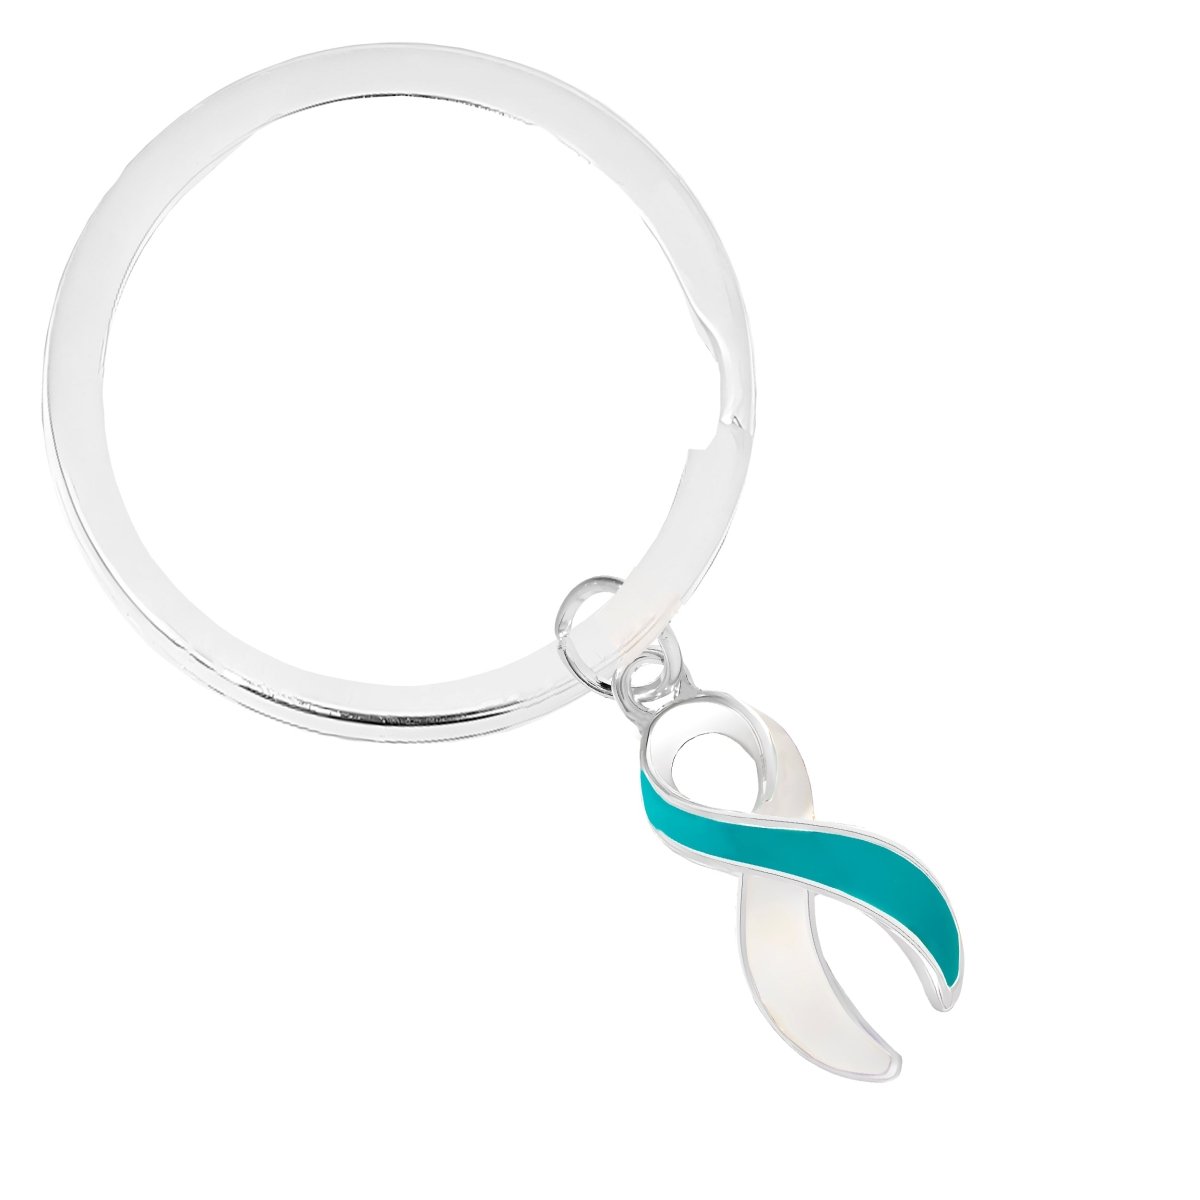 Teal & White Ribbon Split Style Key Chains - Fundraising For A Cause